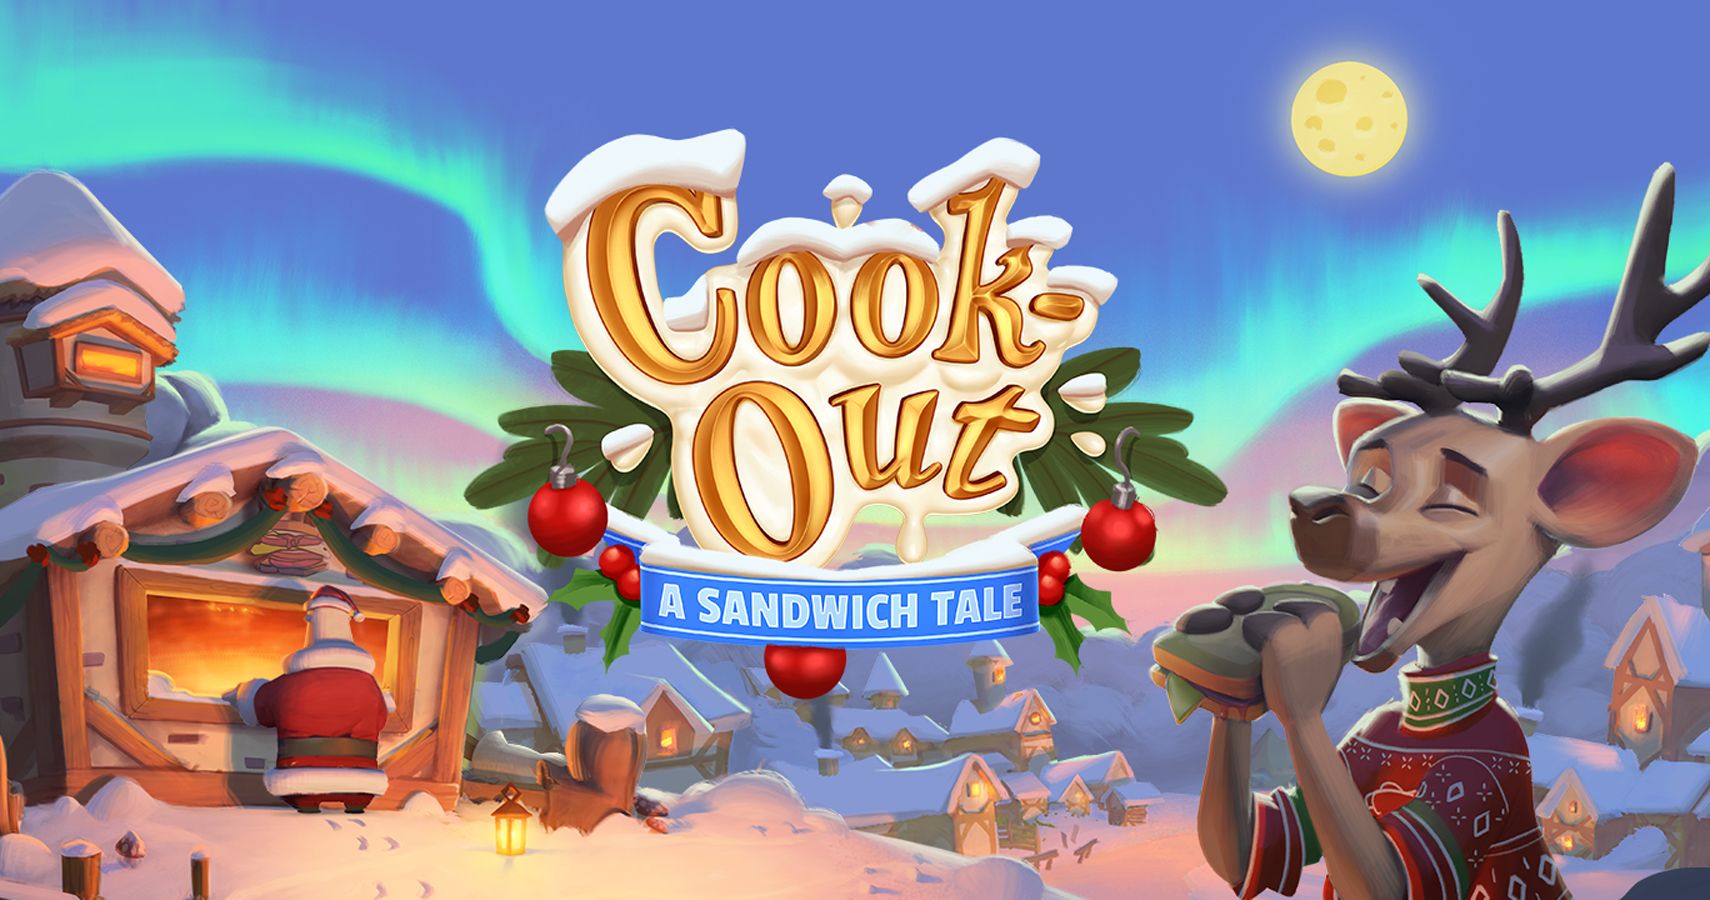 Cookout Christmas 2022 Cook-Out: A Sandwich Tale's Holiday Event Can Warm Any Grinch's Heart